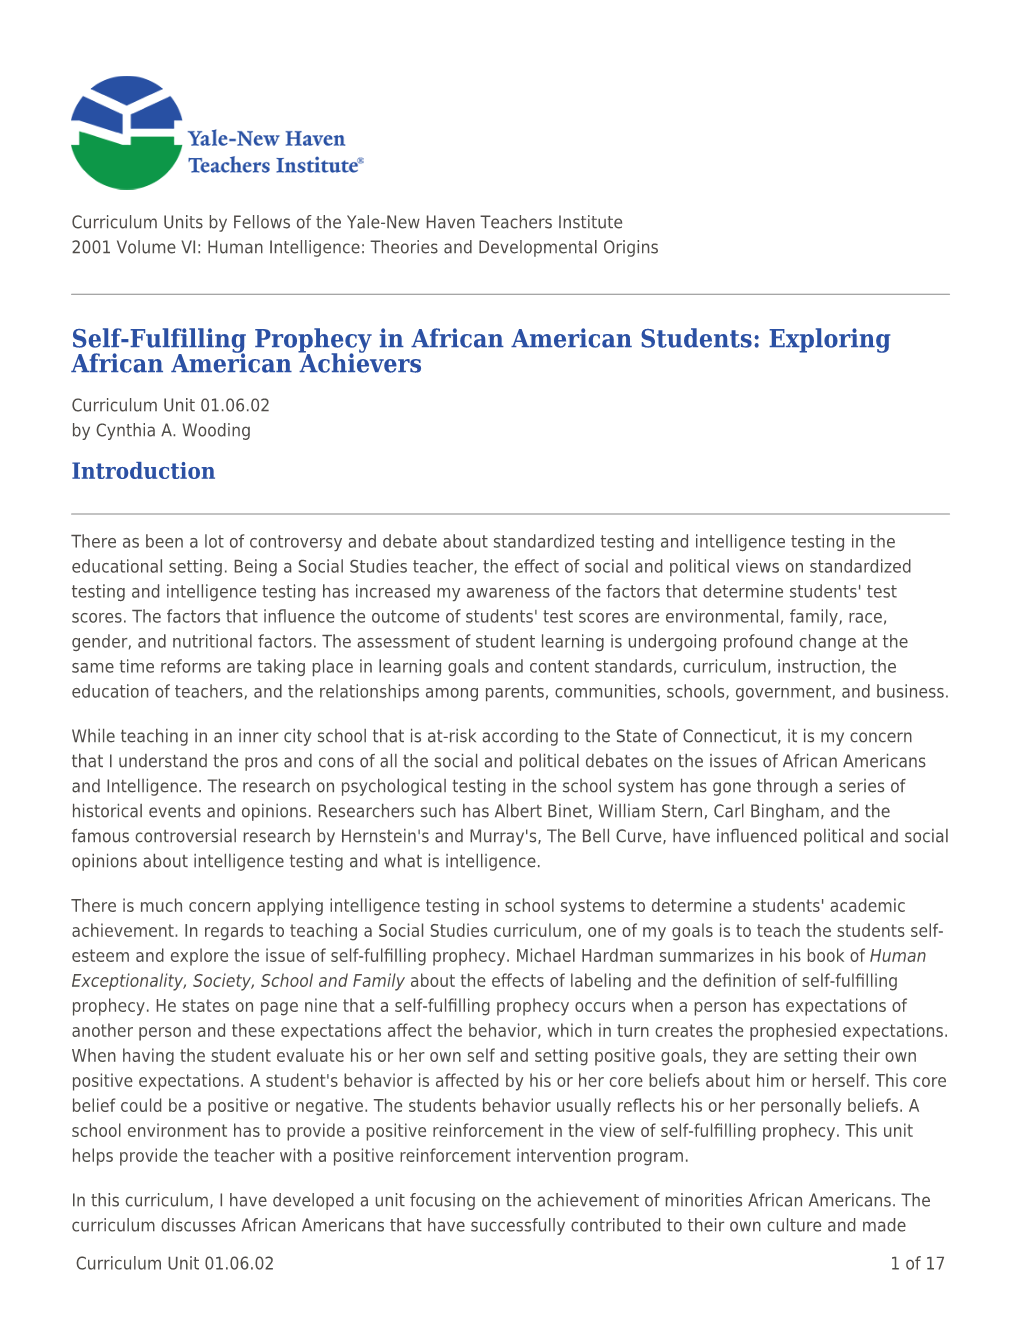 Self-Fulfilling Prophecy in African American Students: Exploring African American Achievers